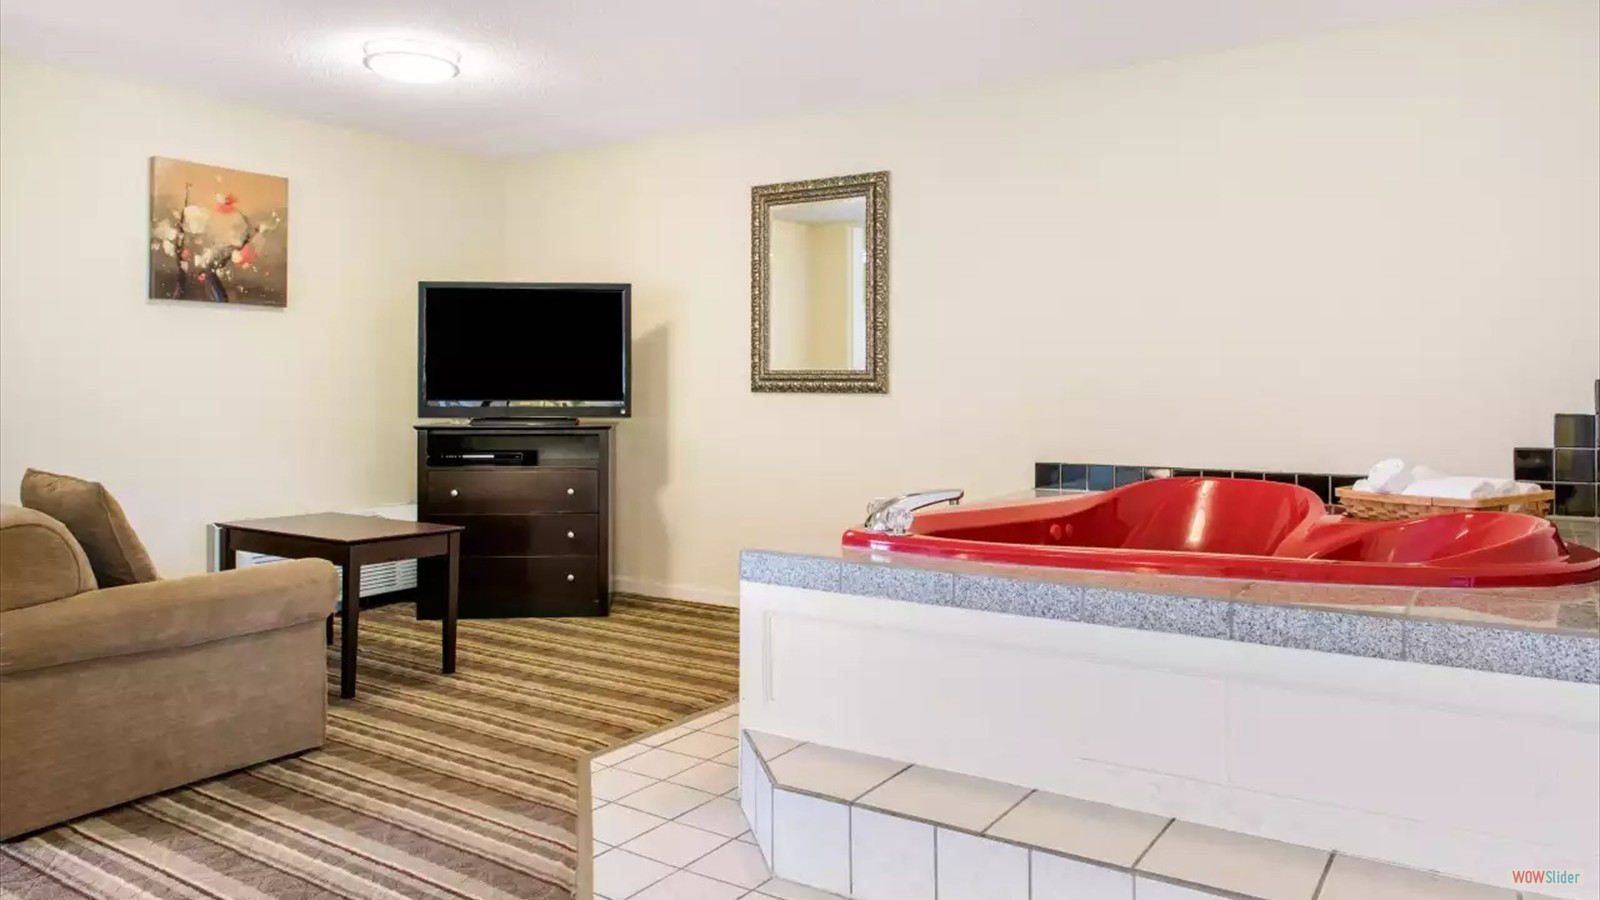  Guest Room With Jacuzzi